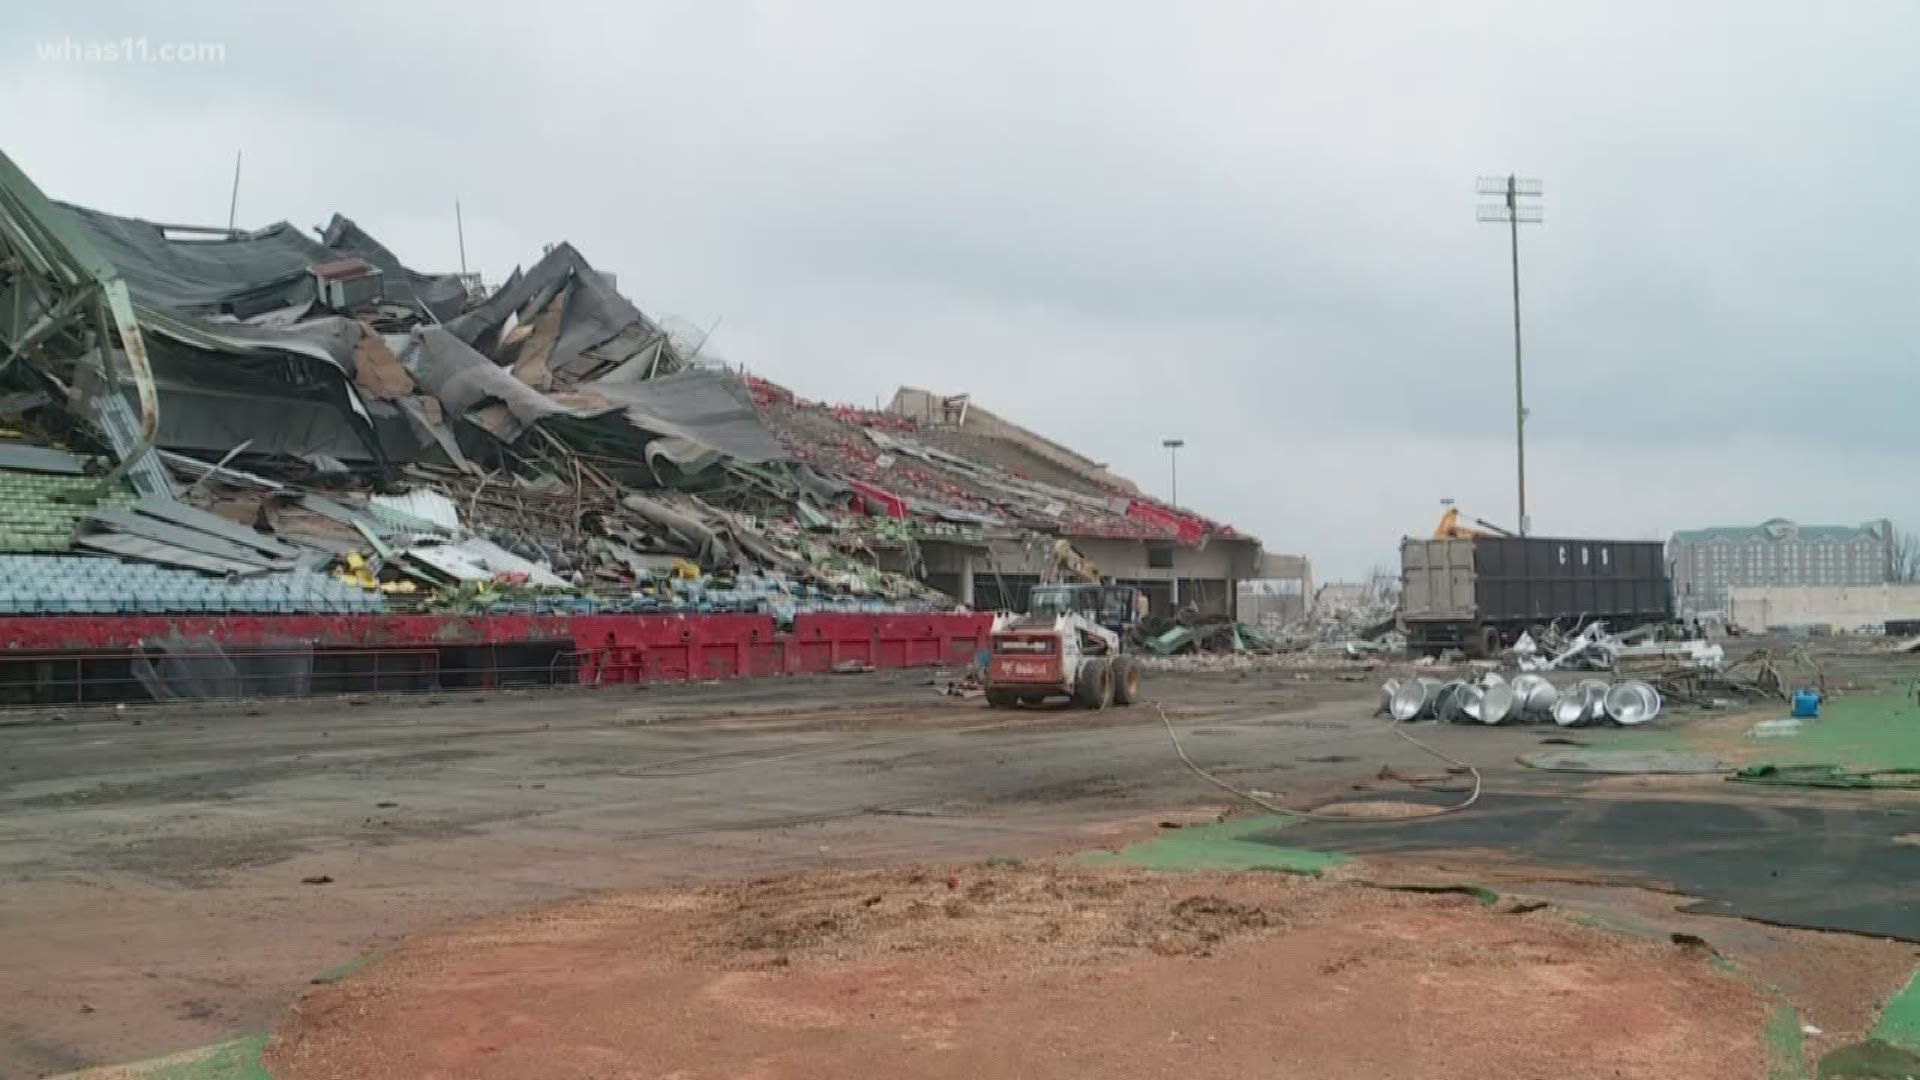 A landmark you're used to seeing along I-65 soon won't be in sight anymore. Crews are working to have old Cardinal Stadium demolished by the end of May.